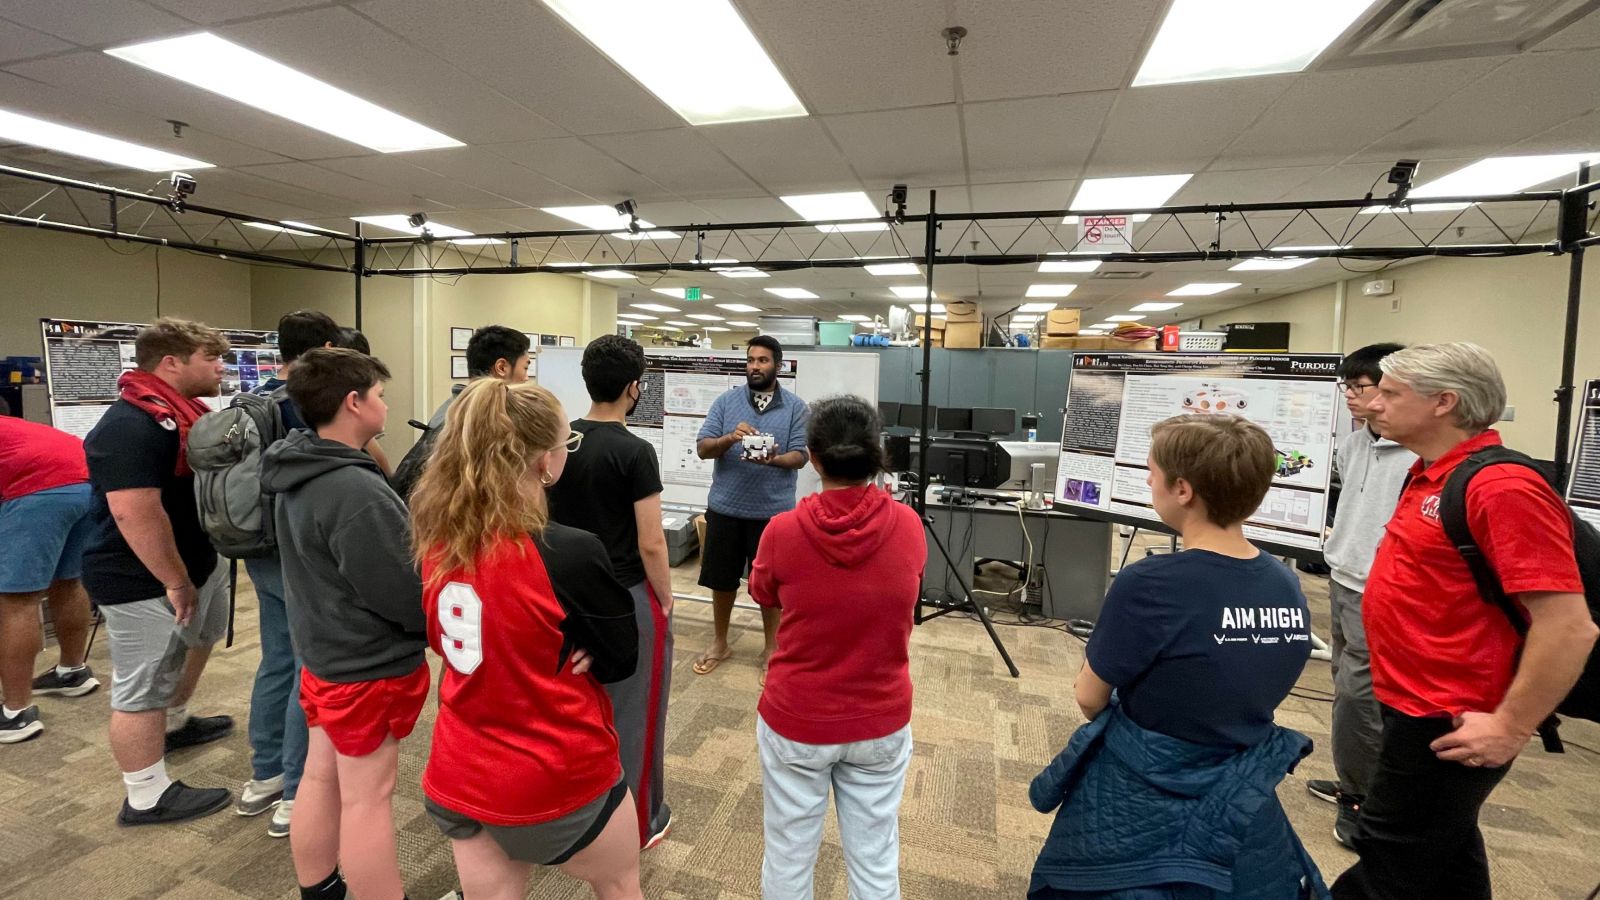 West Lafayette Jr./Sr High School students witnessed research presentations during a week-long outreach program at Purdue's SMART Lab. (Photo provided by event programmers)